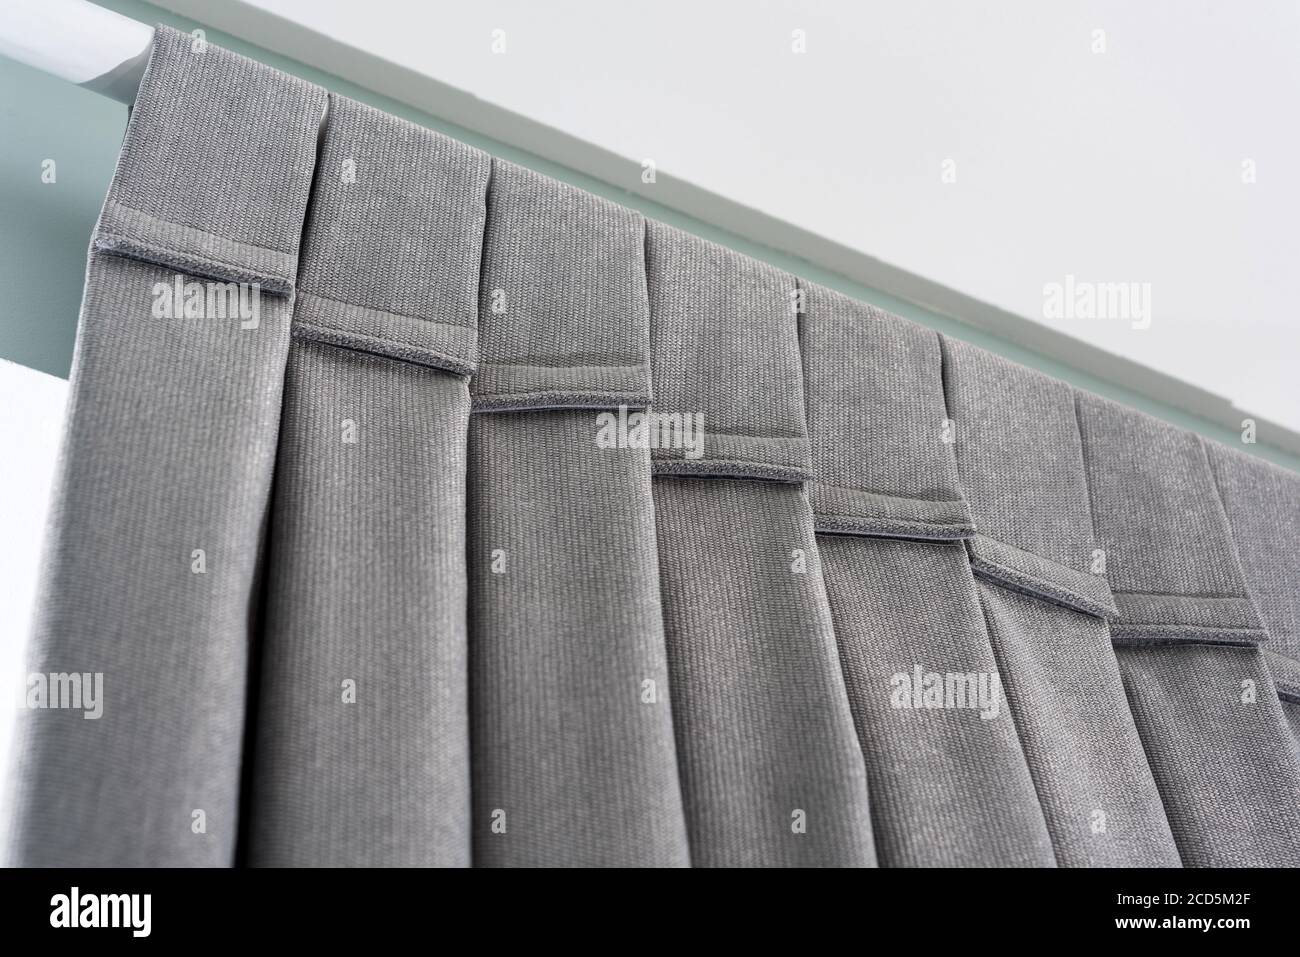 Closeup view velcro loops of curtain in thin and thick vertical folds made  of dense fabric.Textured materials and textiles abstract backgrounds Stock  Photo - Alamy